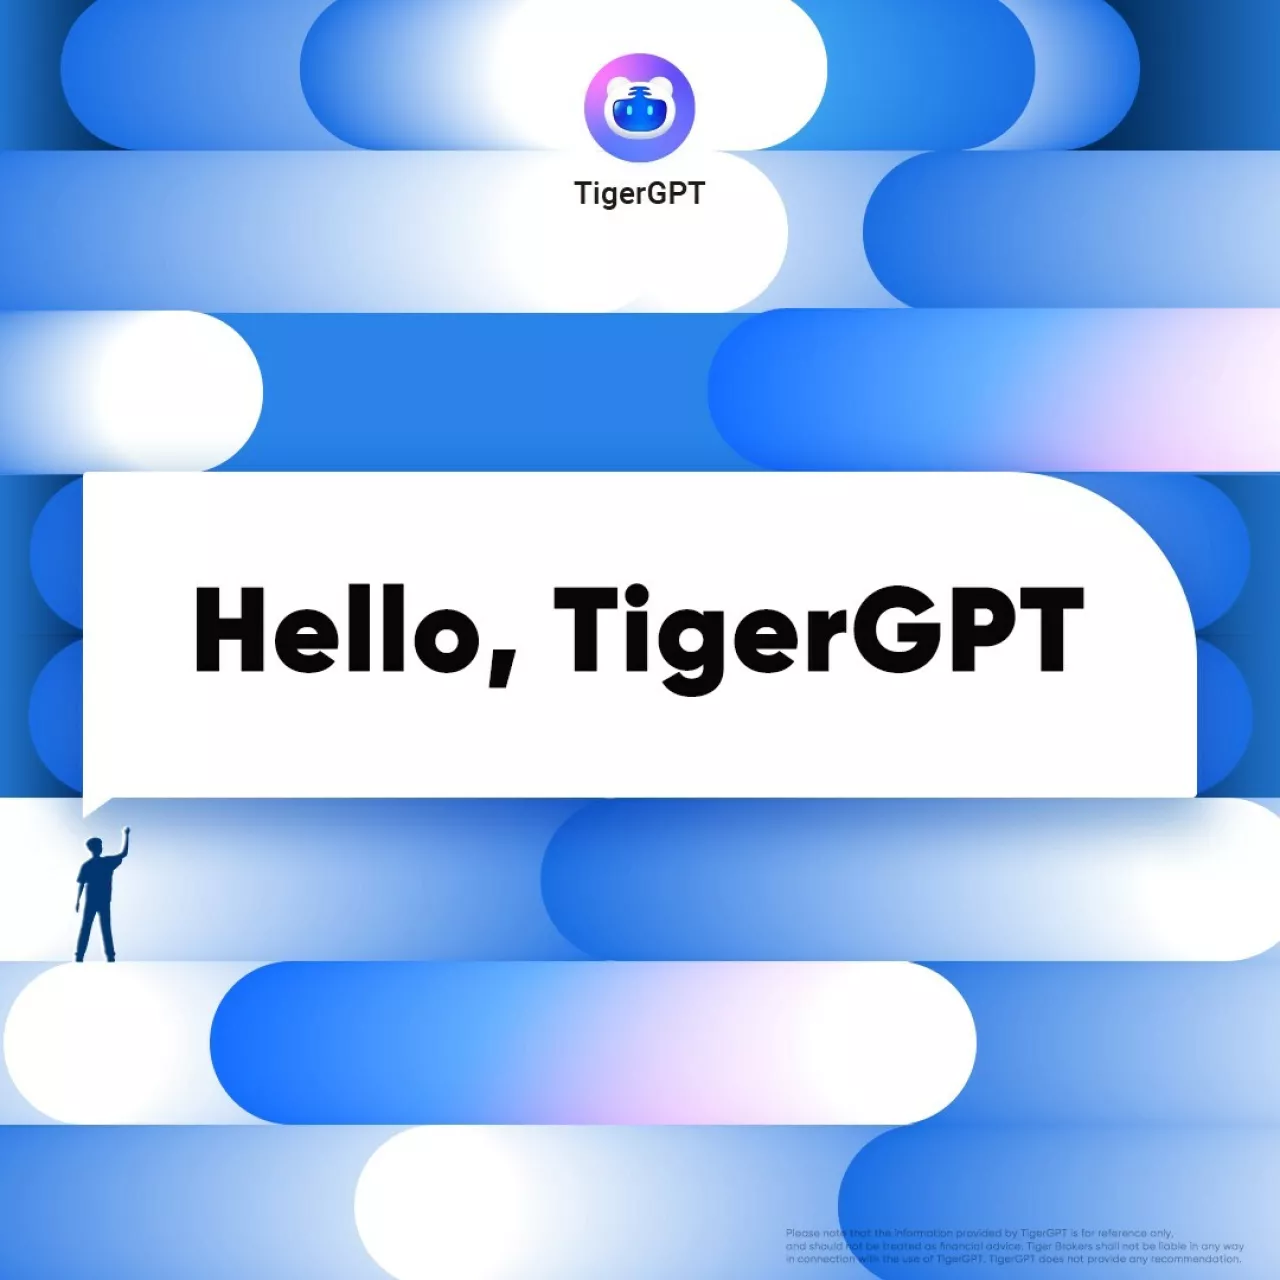 Tiger Brokers unveils TigerGPT, the industry's first AI investment assistant img#1